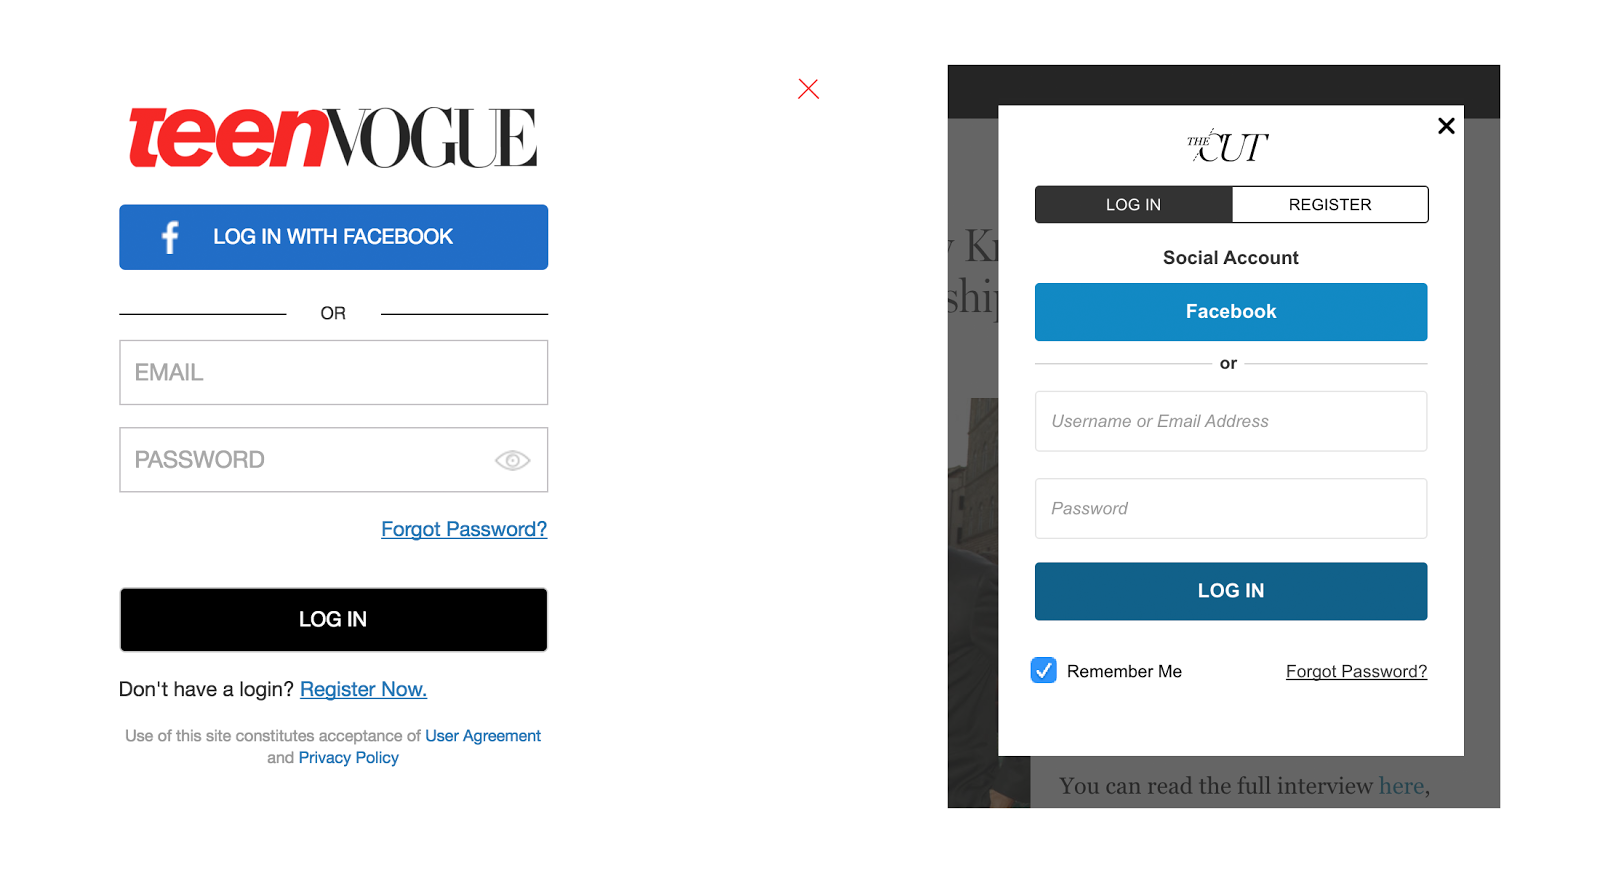 Teen Vogue and The Cut login screens with dual login options. Both have one Facebook button and one email password login option